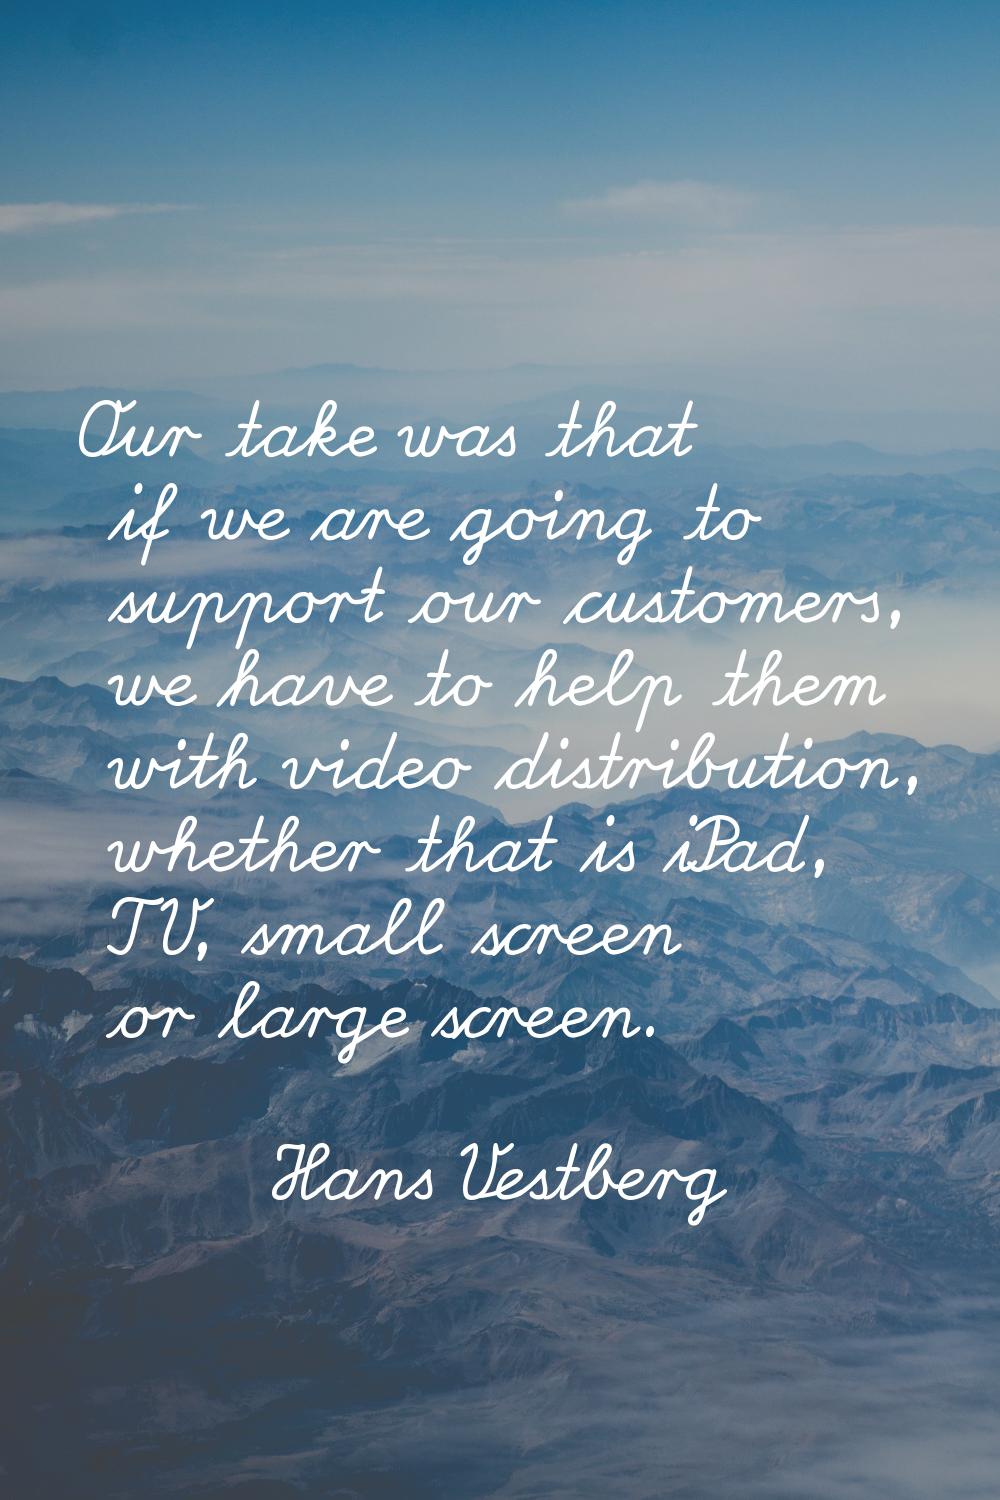 Our take was that if we are going to support our customers, we have to help them with video distrib